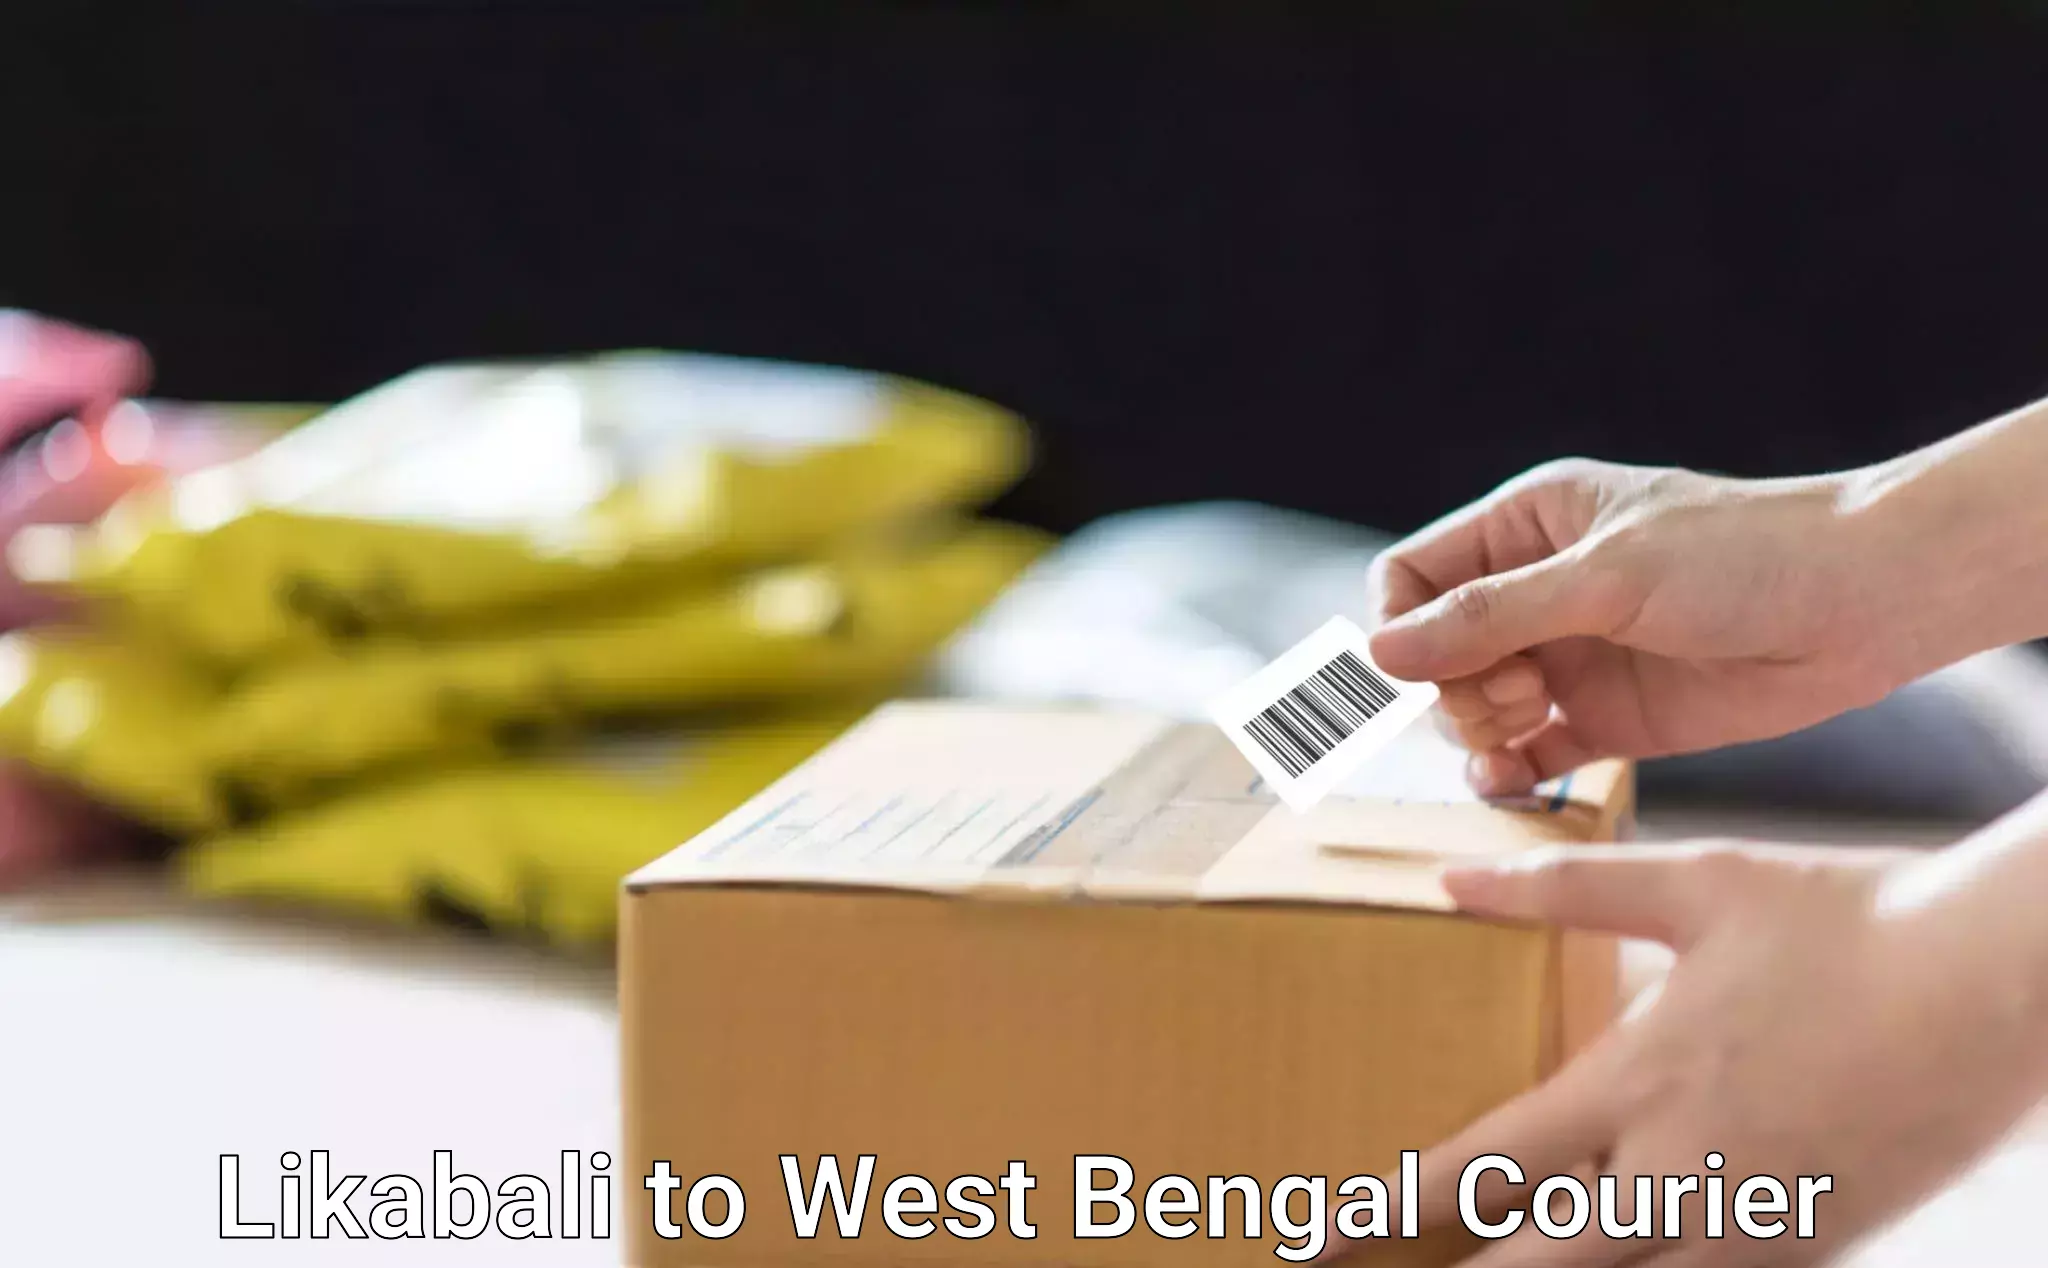 Courier service partnerships Likabali to West Bengal